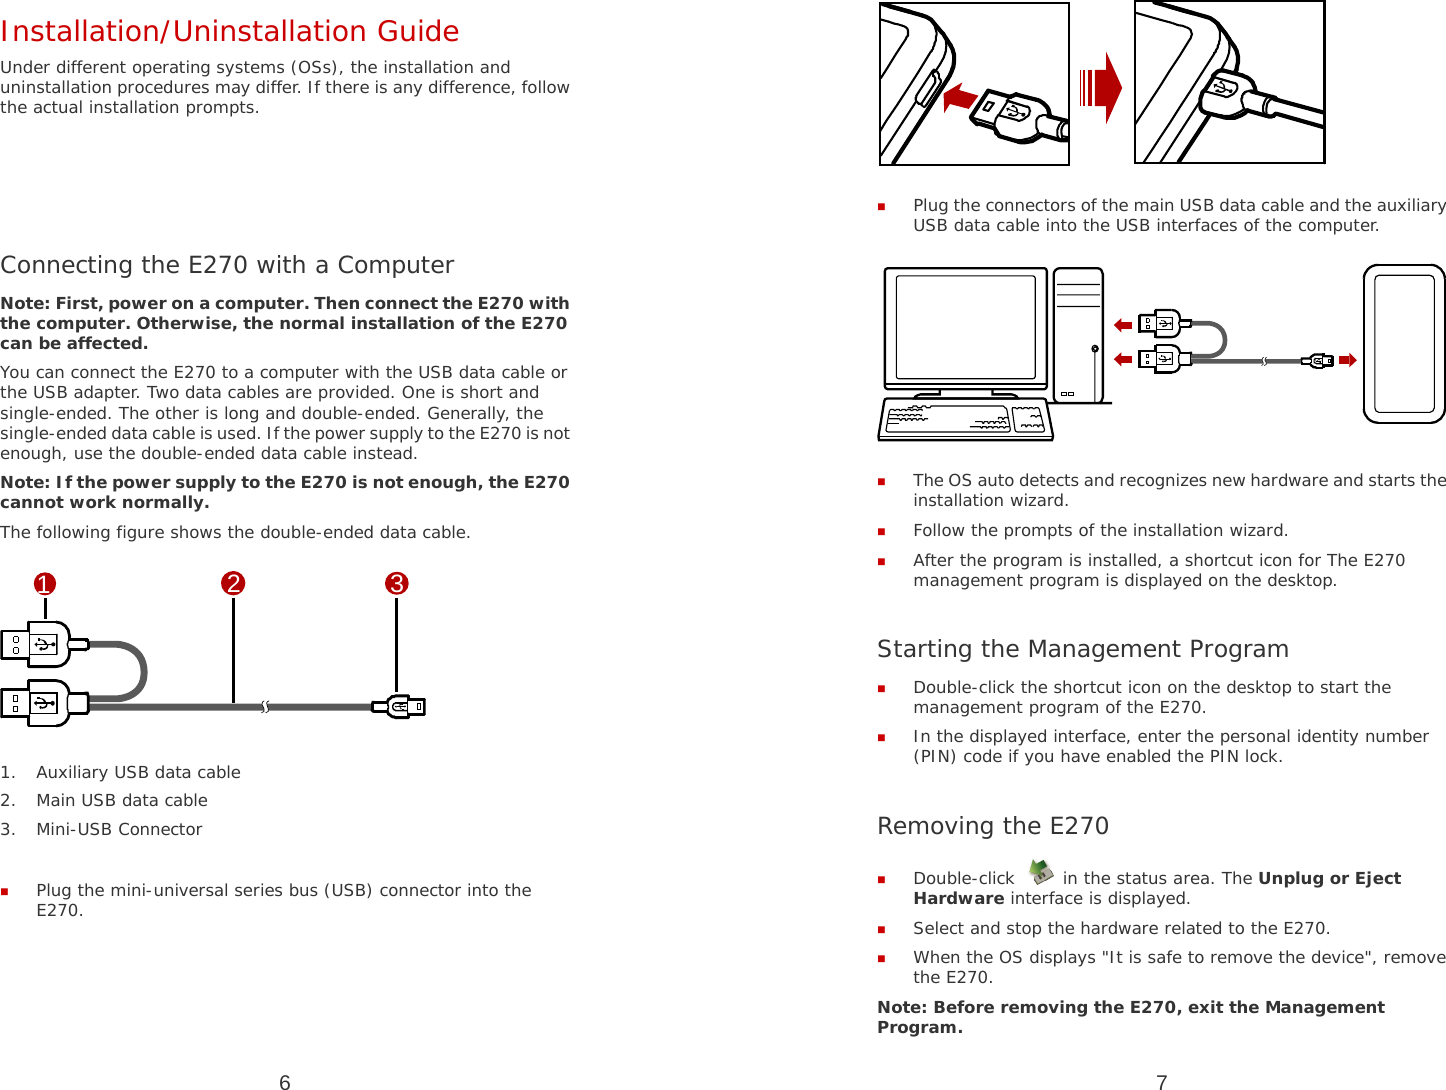 6 Installation/Uninstallation Guide Under different operating systems (OSs), the installation and uninstallation procedures may differ. If there is any difference, follow the actual installation prompts.     Connecting the E270 with a Computer Note: First, power on a computer. Then connect the E270 with the computer. Otherwise, the normal installation of the E270 can be affected. You can connect the E270 to a computer with the USB data cable or the USB adapter. Two data cables are provided. One is short and single-ended. The other is long and double-ended. Generally, the single-ended data cable is used. If the power supply to the E270 is not enough, use the double-ended data cable instead. Note: If the power supply to the E270 is not enough, the E270 cannot work normally. The following figure shows the double-ended data cable. 123 1. Auxiliary USB data cable 2. Main USB data cable 3. Mini-USB Connector   Plug the mini-universal series bus (USB) connector into the E270. 7   Plug the connectors of the main USB data cable and the auxiliary USB data cable into the USB interfaces of the computer.   The OS auto detects and recognizes new hardware and starts the installation wizard.  Follow the prompts of the installation wizard.  After the program is installed, a shortcut icon for The E270 management program is displayed on the desktop.  Starting the Management Program  Double-click the shortcut icon on the desktop to start the management program of the E270.  In the displayed interface, enter the personal identity number (PIN) code if you have enabled the PIN lock.  Removing the E270  Double-click   in the status area. The Unplug or Eject Hardware interface is displayed.  Select and stop the hardware related to the E270.  When the OS displays &quot;It is safe to remove the device&quot;, remove the E270. Note: Before removing the E270, exit the Management Program. 